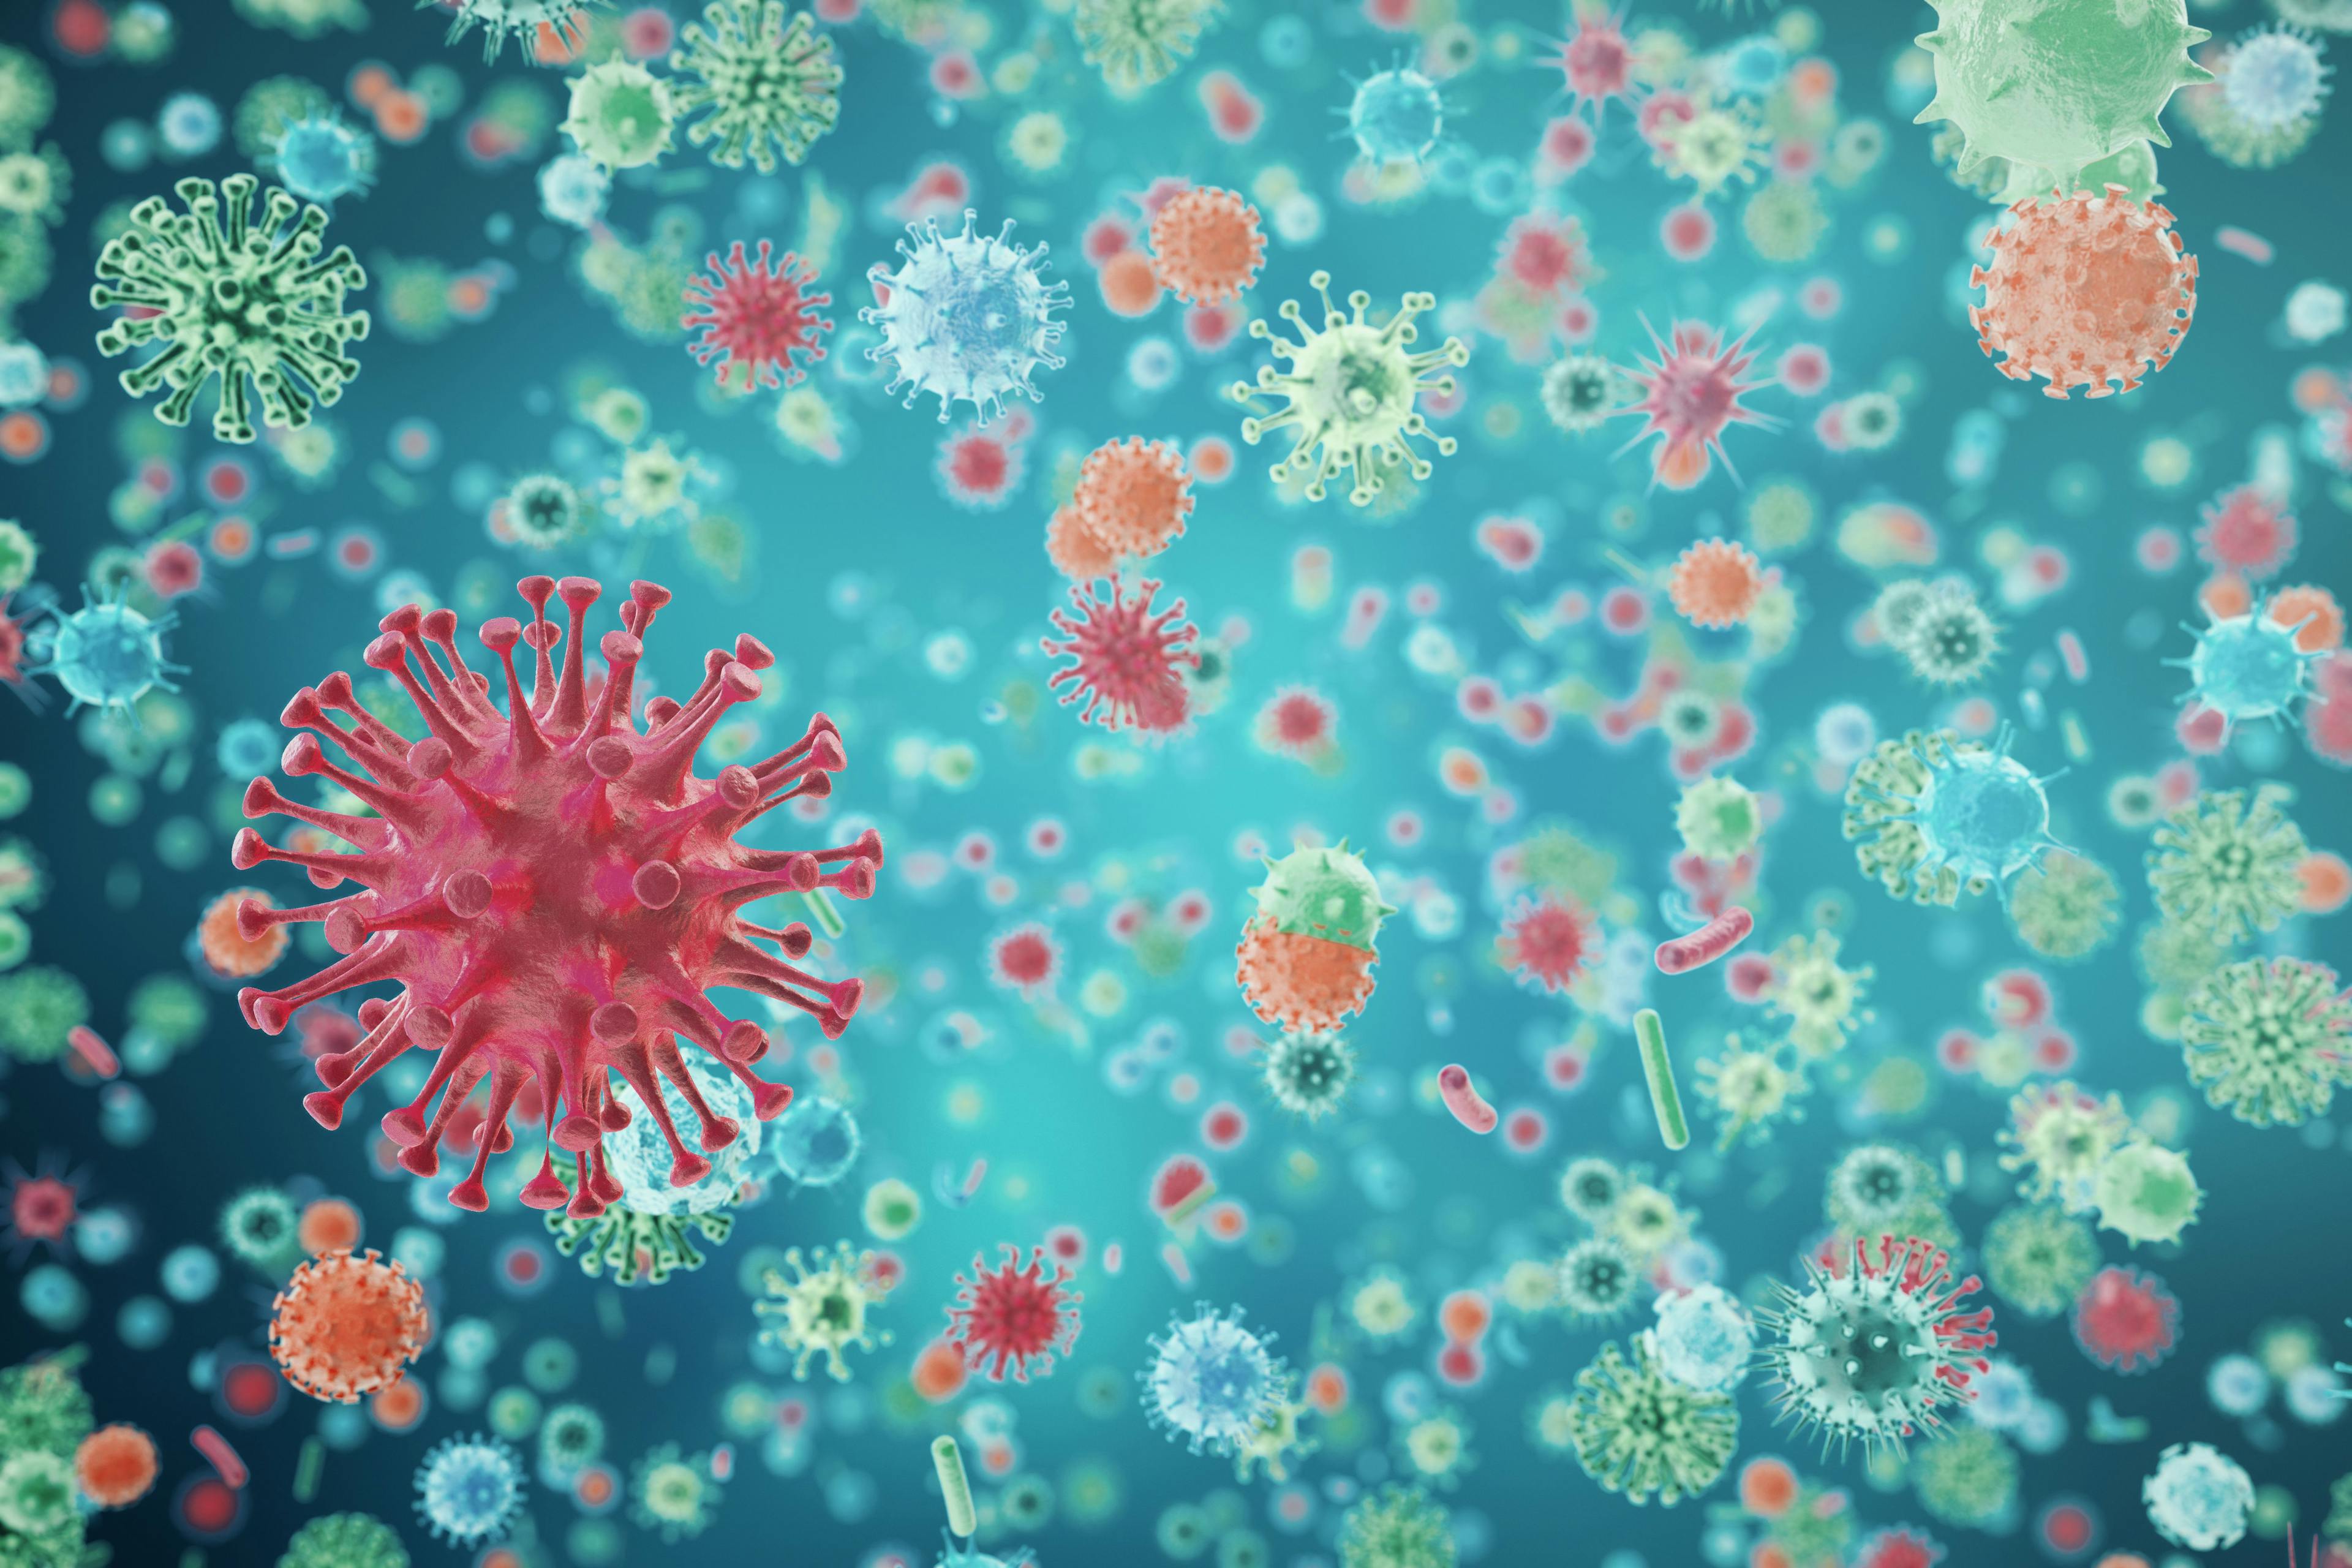 Infectious diseases -- Image credit: rost9 | stock.adobe.com